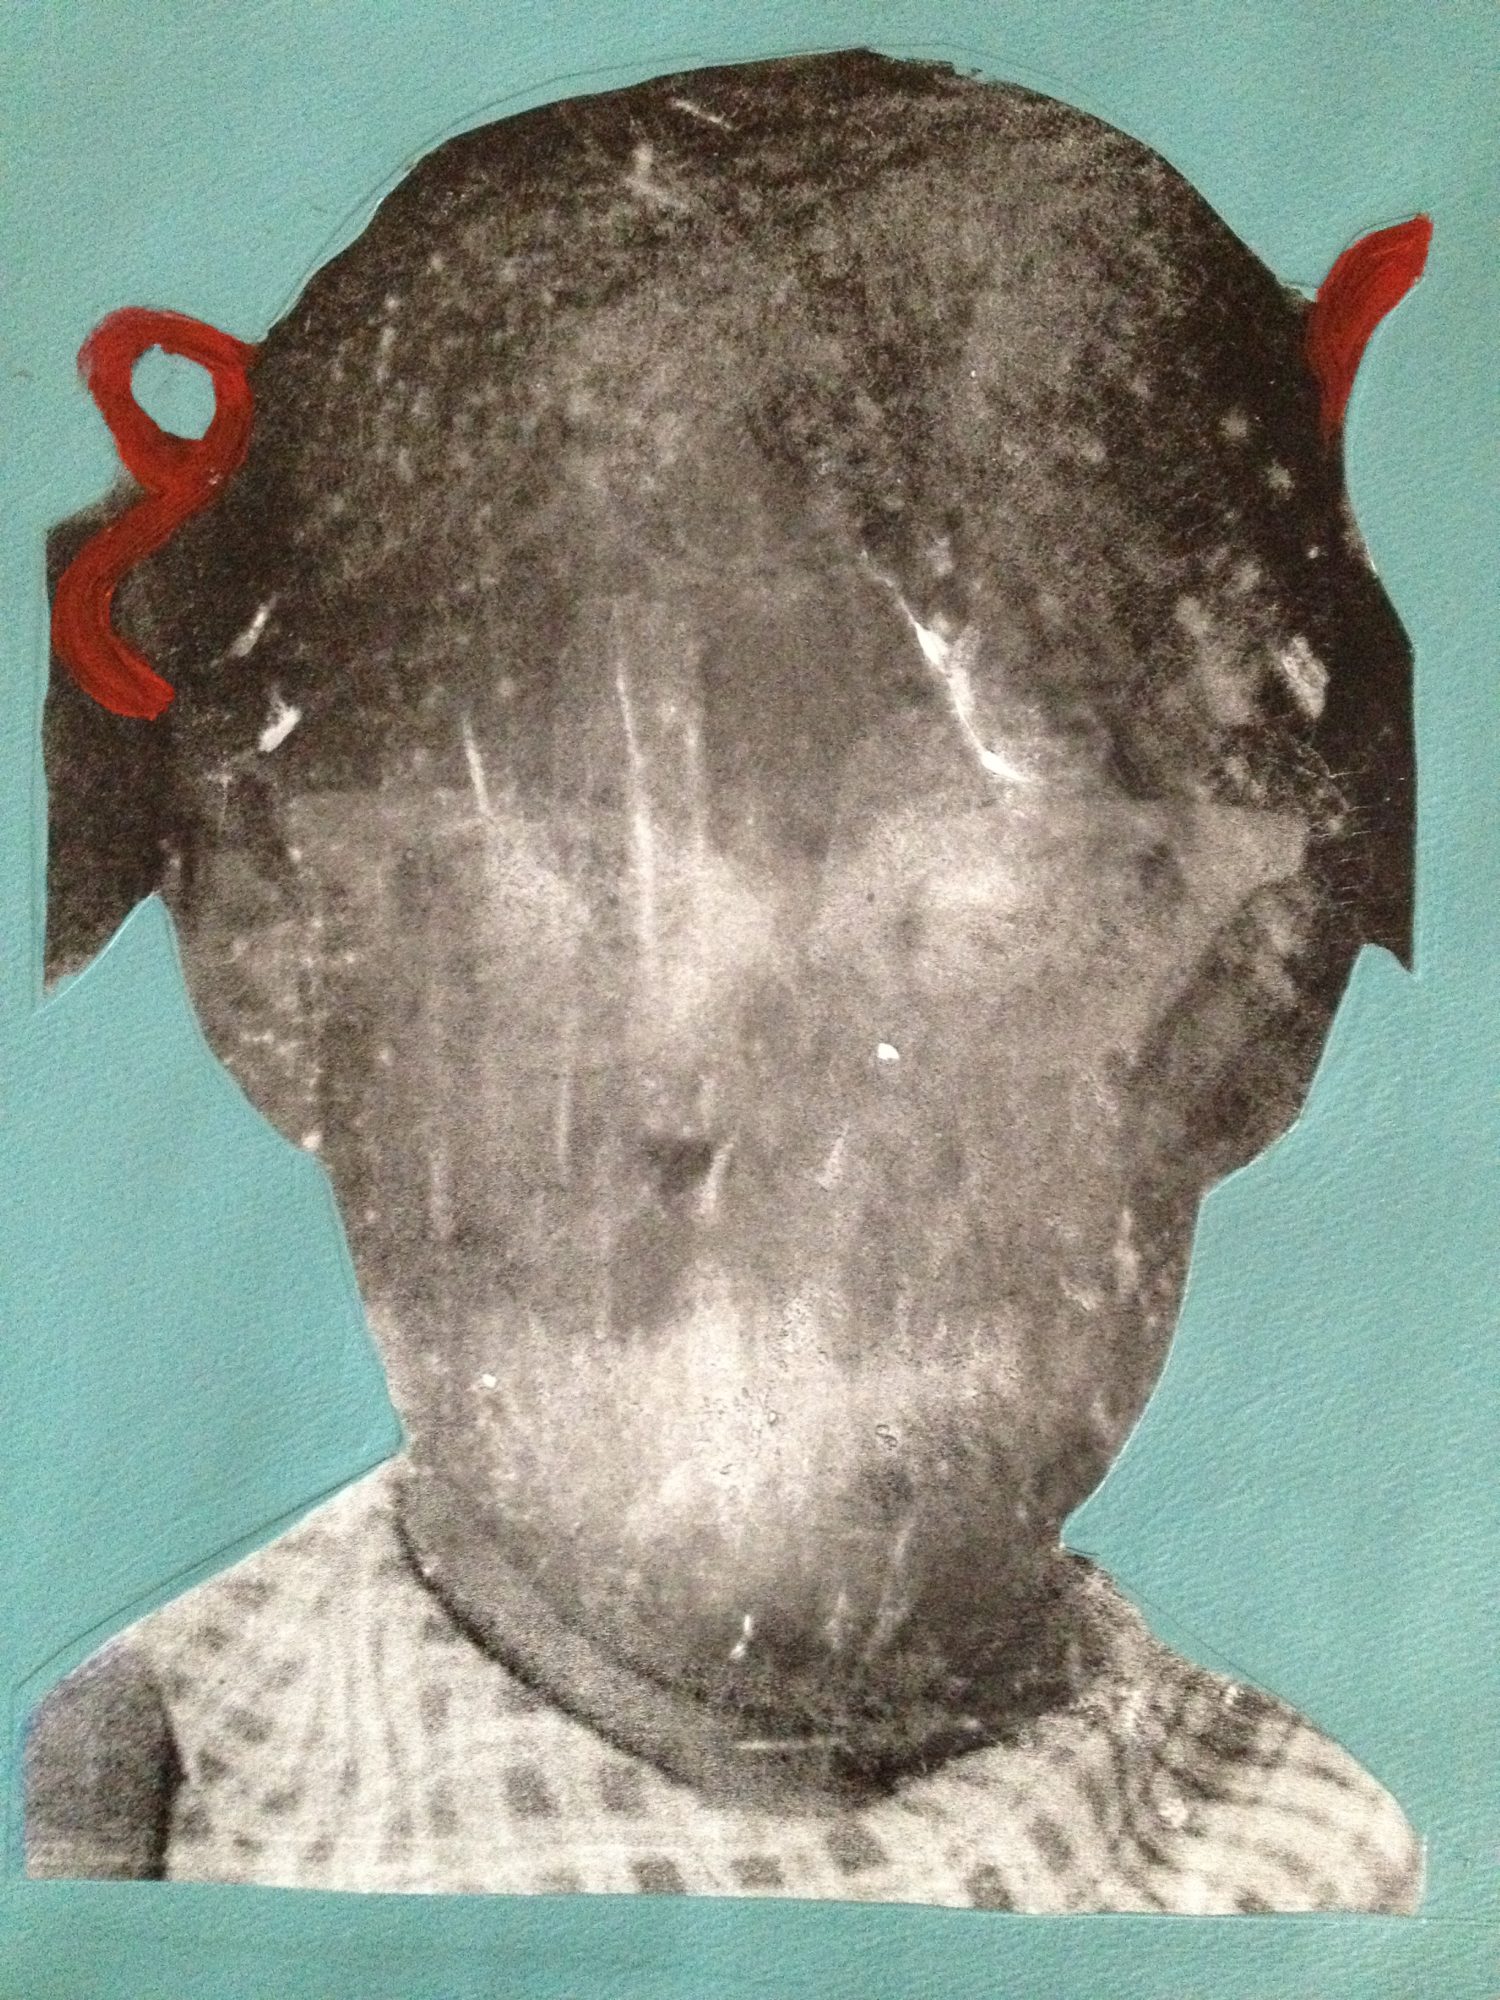 Mixed media image by Deborah Roberts on a teal background featuring the image of a girl wearing red ties in her hair and a geometrically patterned top whose face has been almost completely removed from the image.